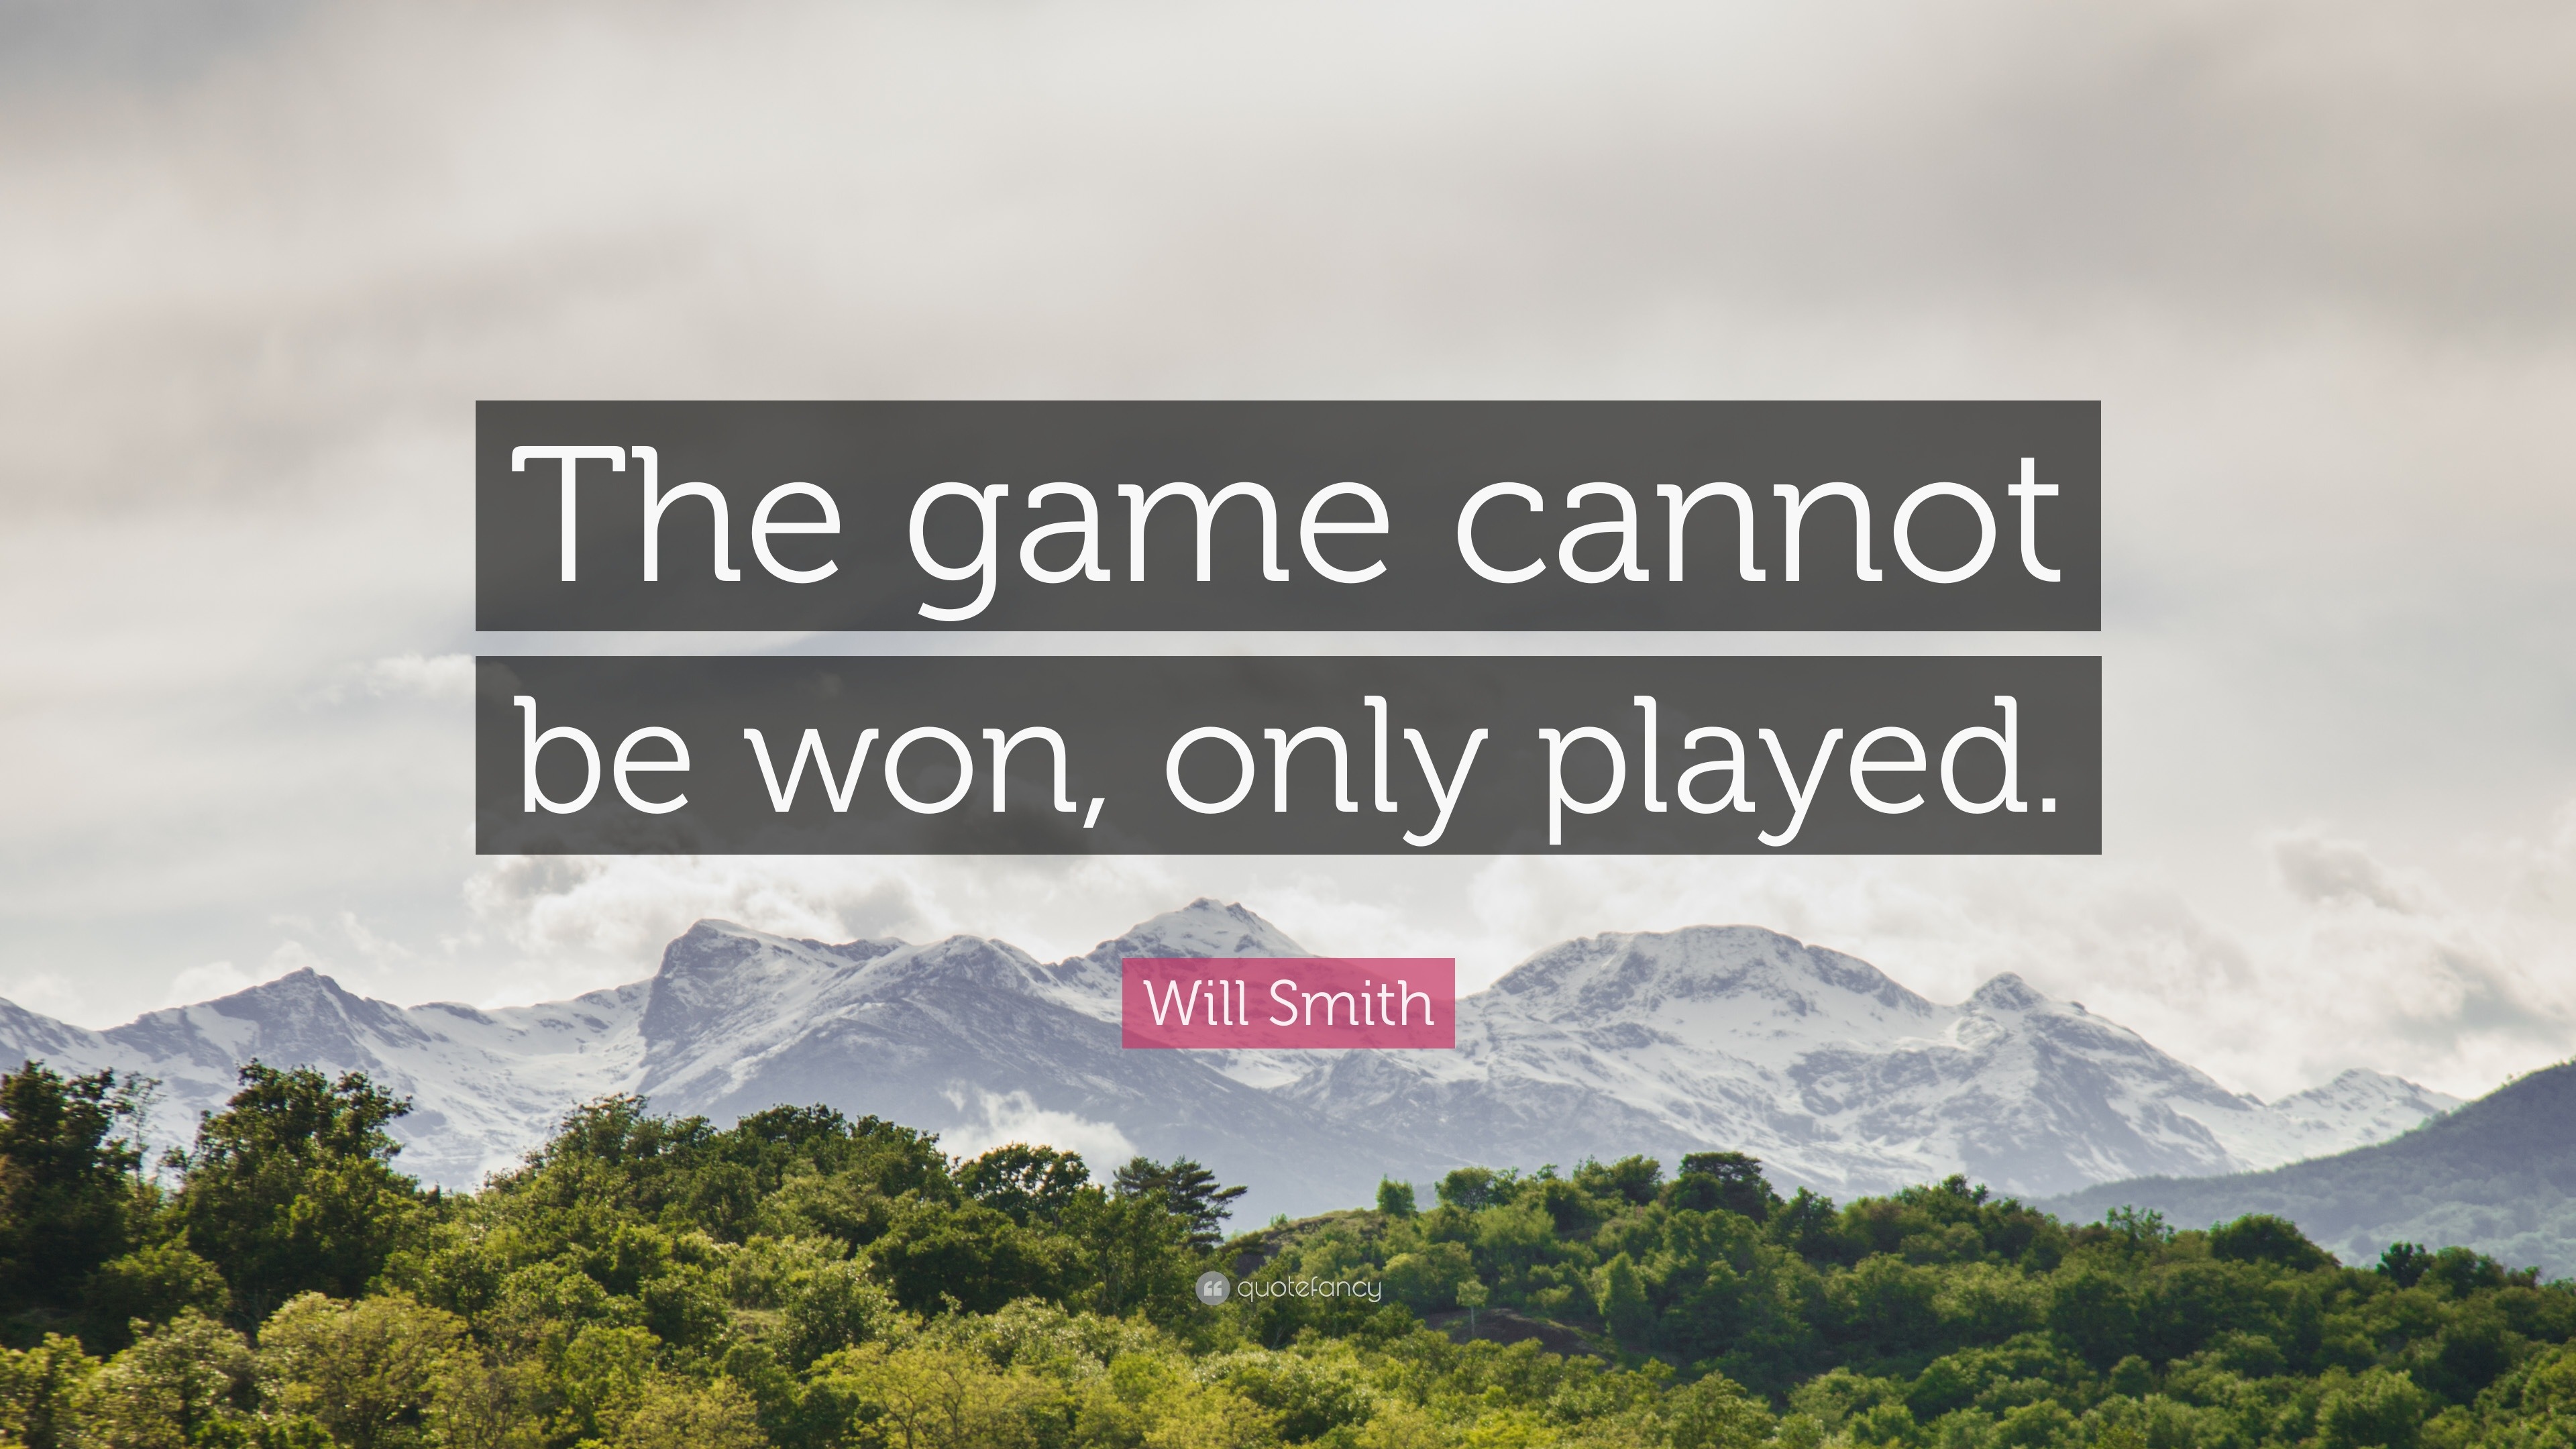 Will Smith Quote: “The game cannot be won, only played.”